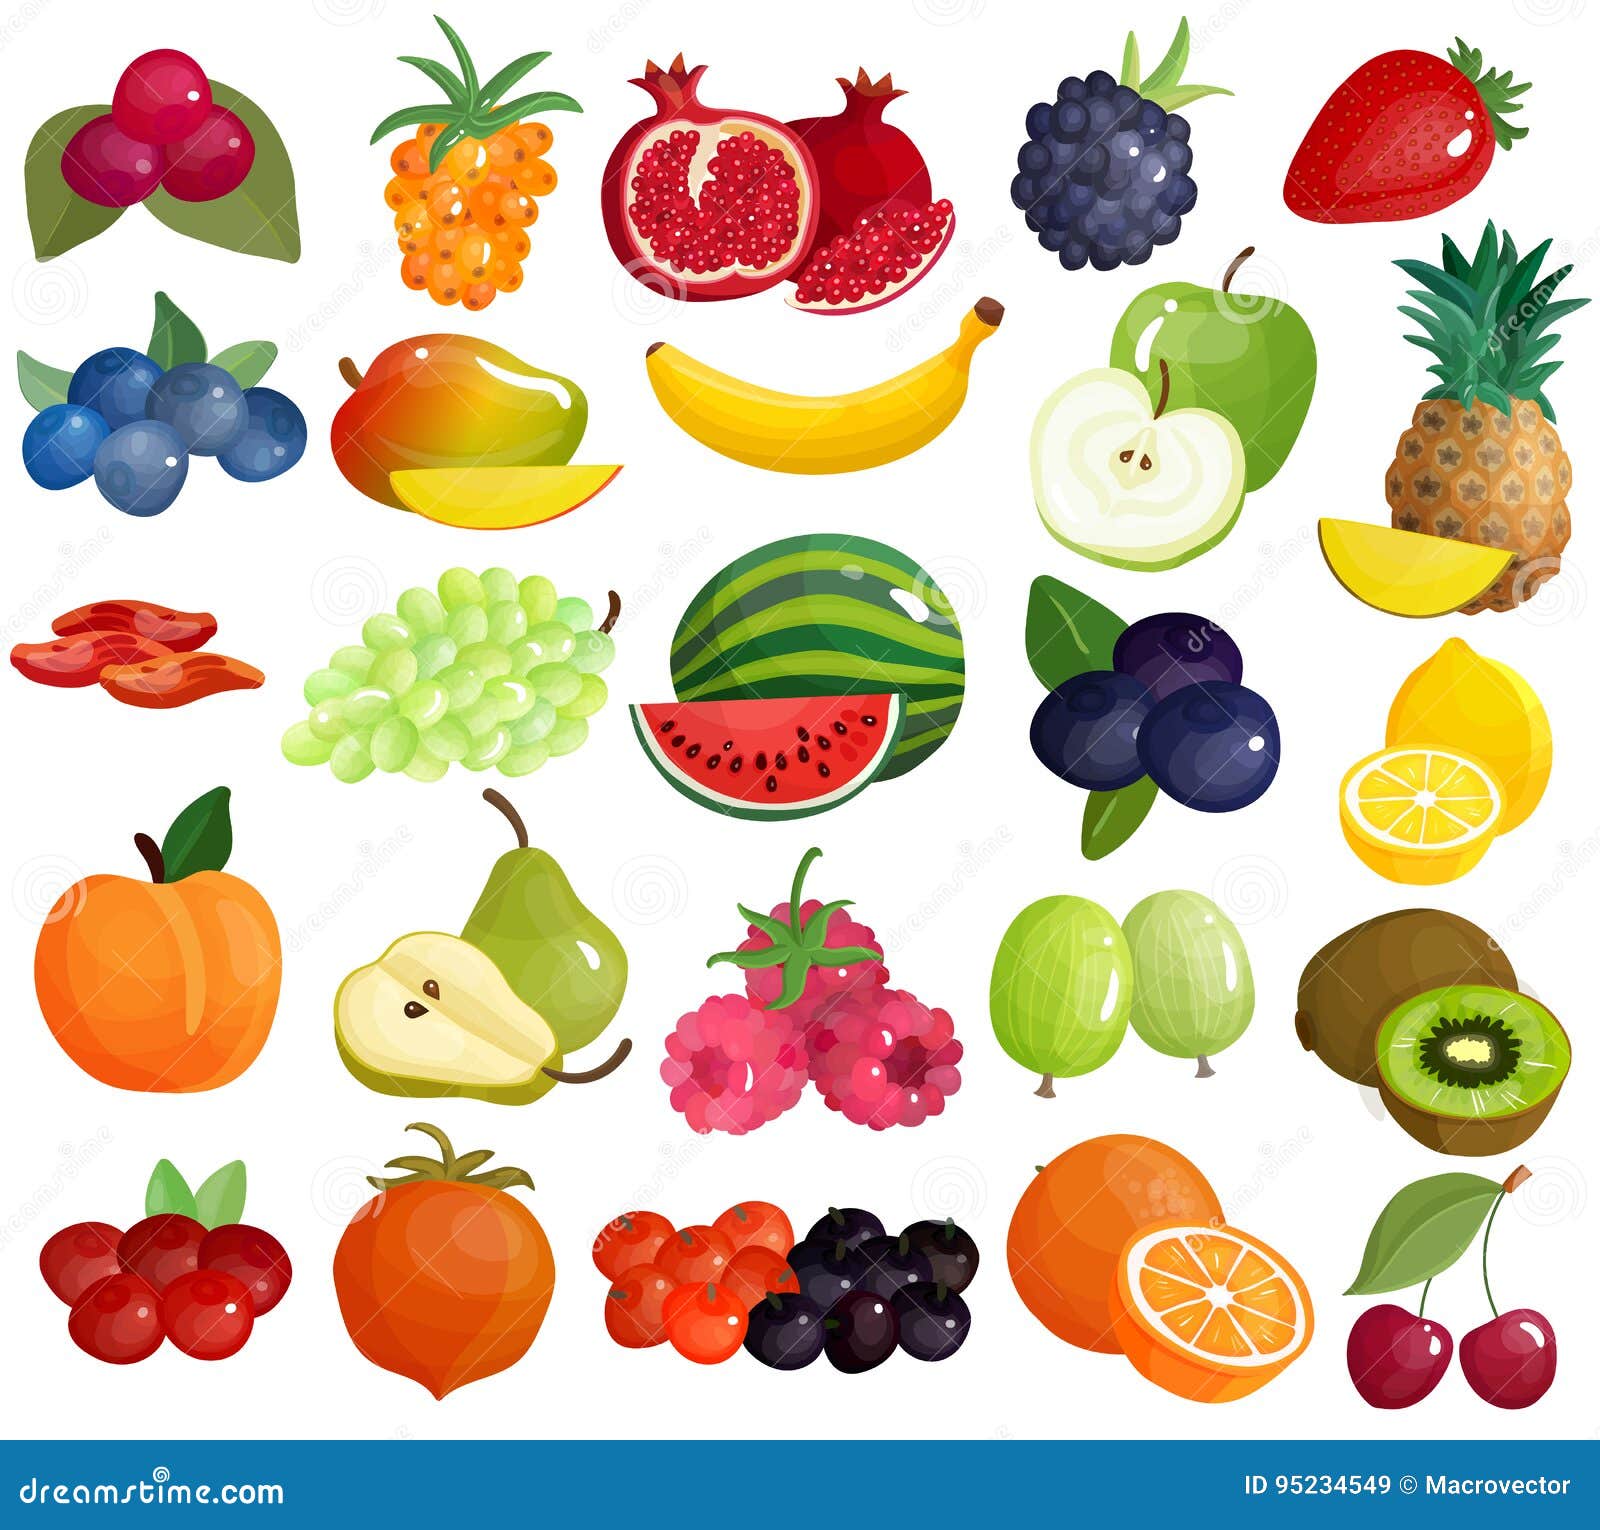 fruits berries colorful icons collection